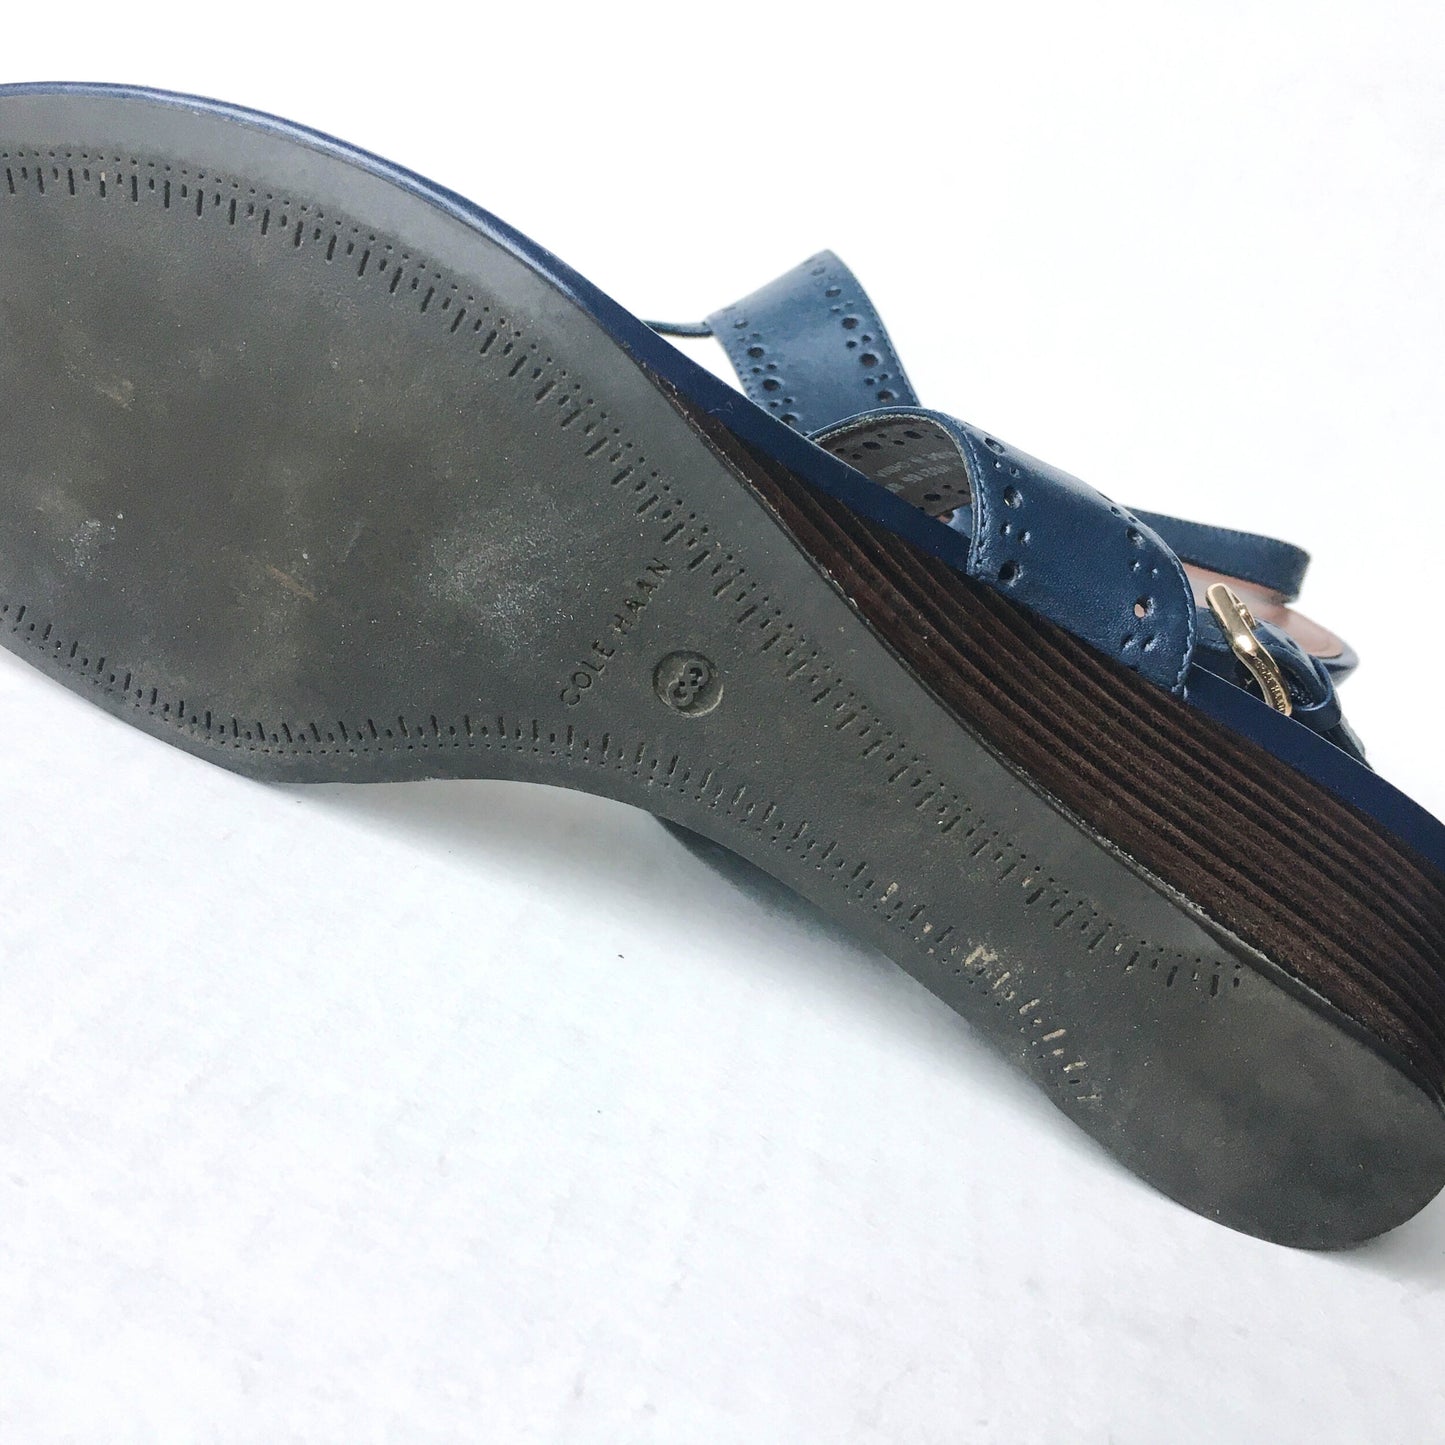 Cole Haan Elise wedge thong sandal - size 8